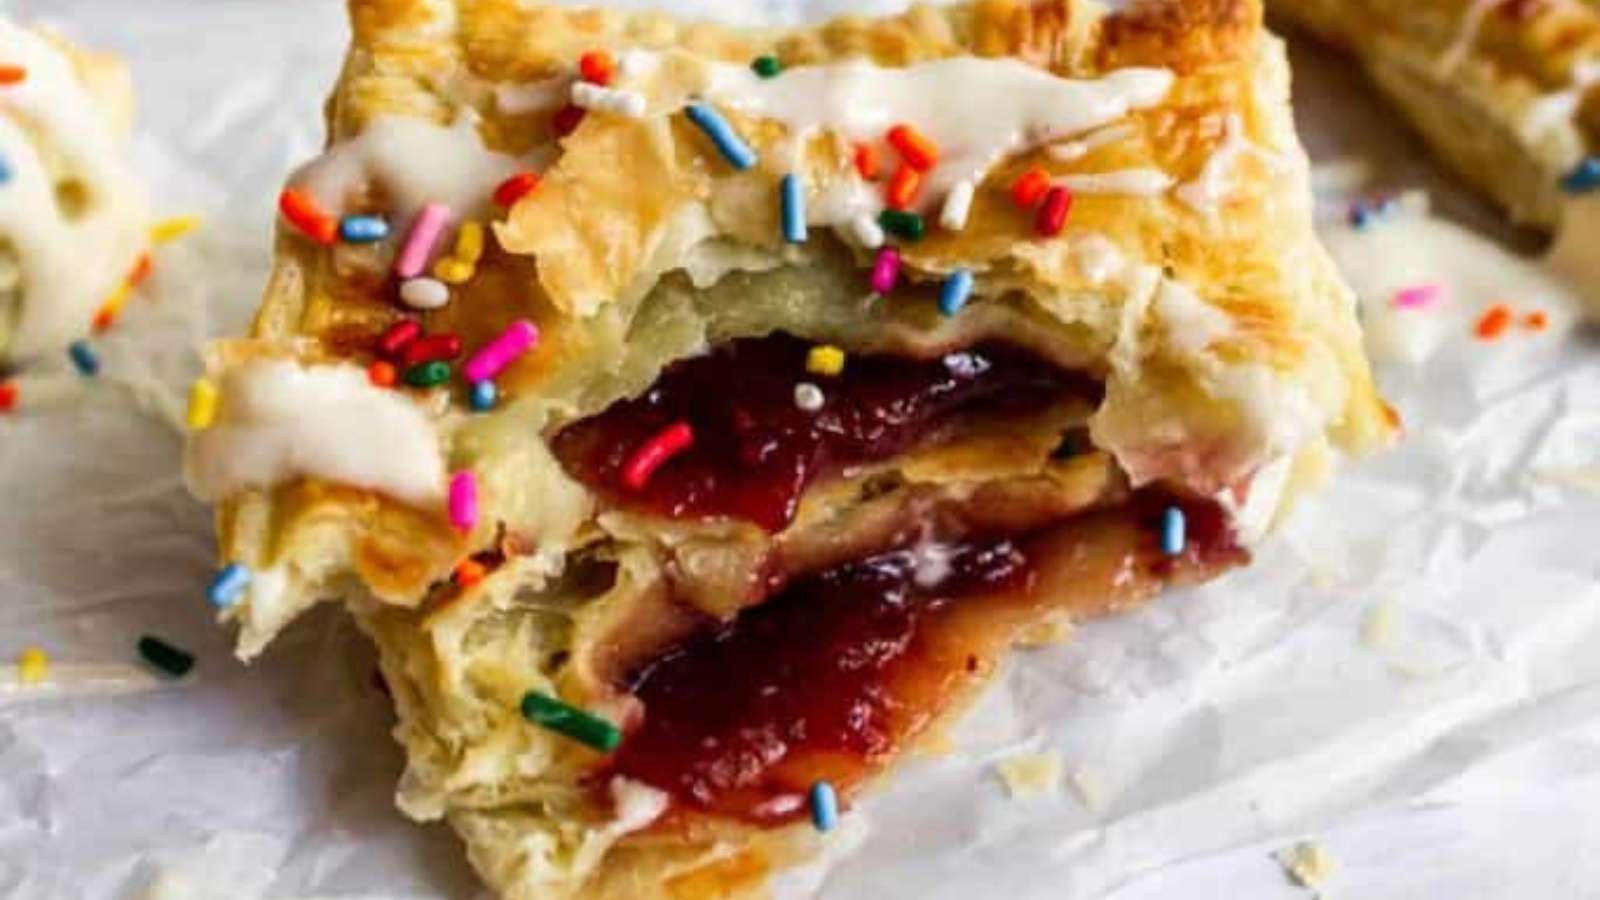 A bite of a pastry with jam and sprinkles.